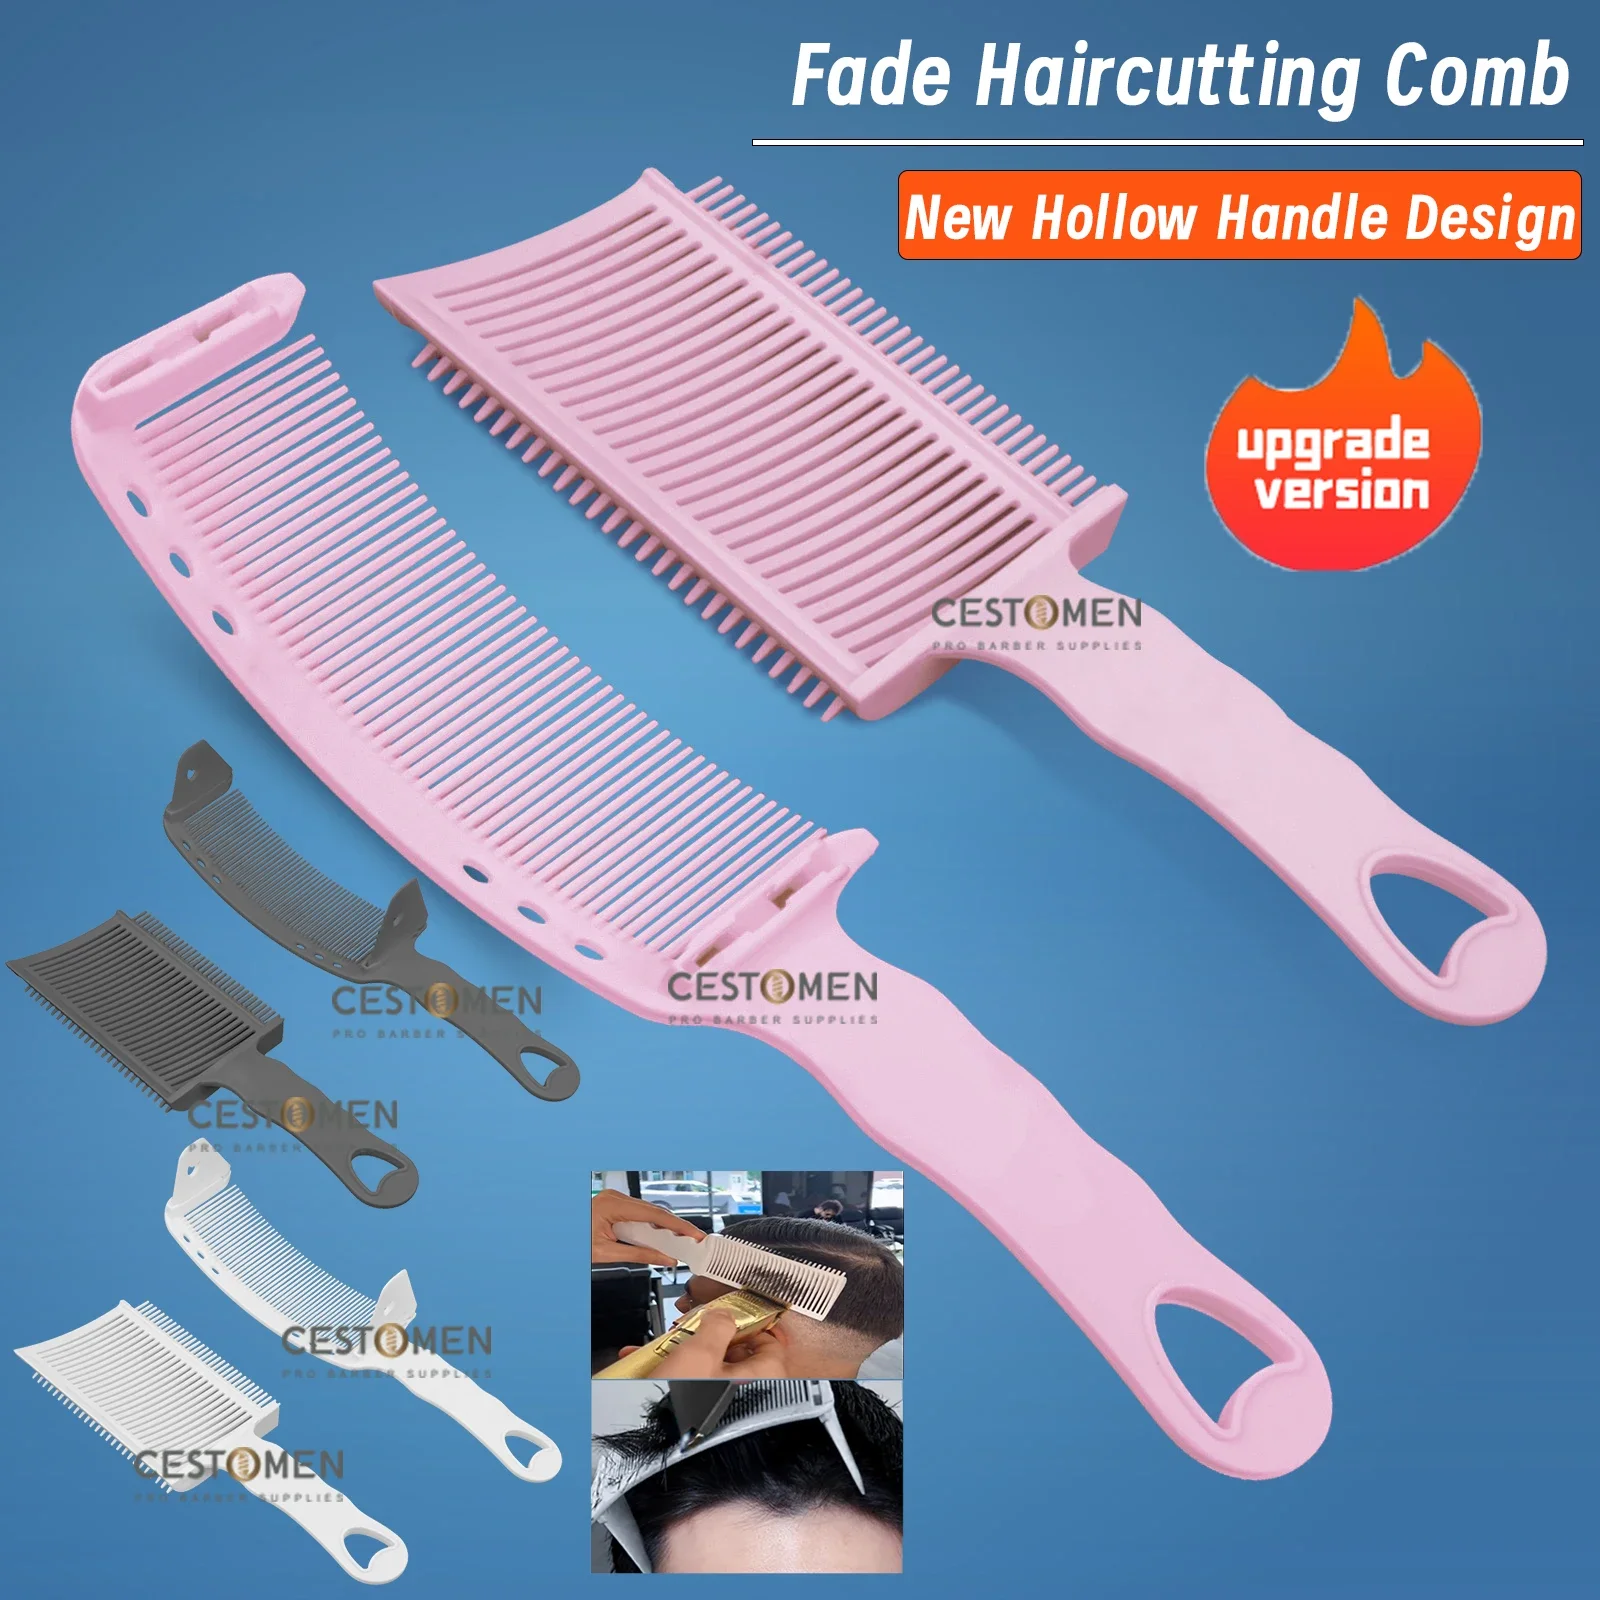 New Style Fading Comb Professional Barber Clipper Blending Flat Top Hair Cutting Comb For Men Heat Resistant Salon Styling Tools wood charcoal pencils drawing set 12pcs professional sketch pencils sketching shading blending pencils for beginners